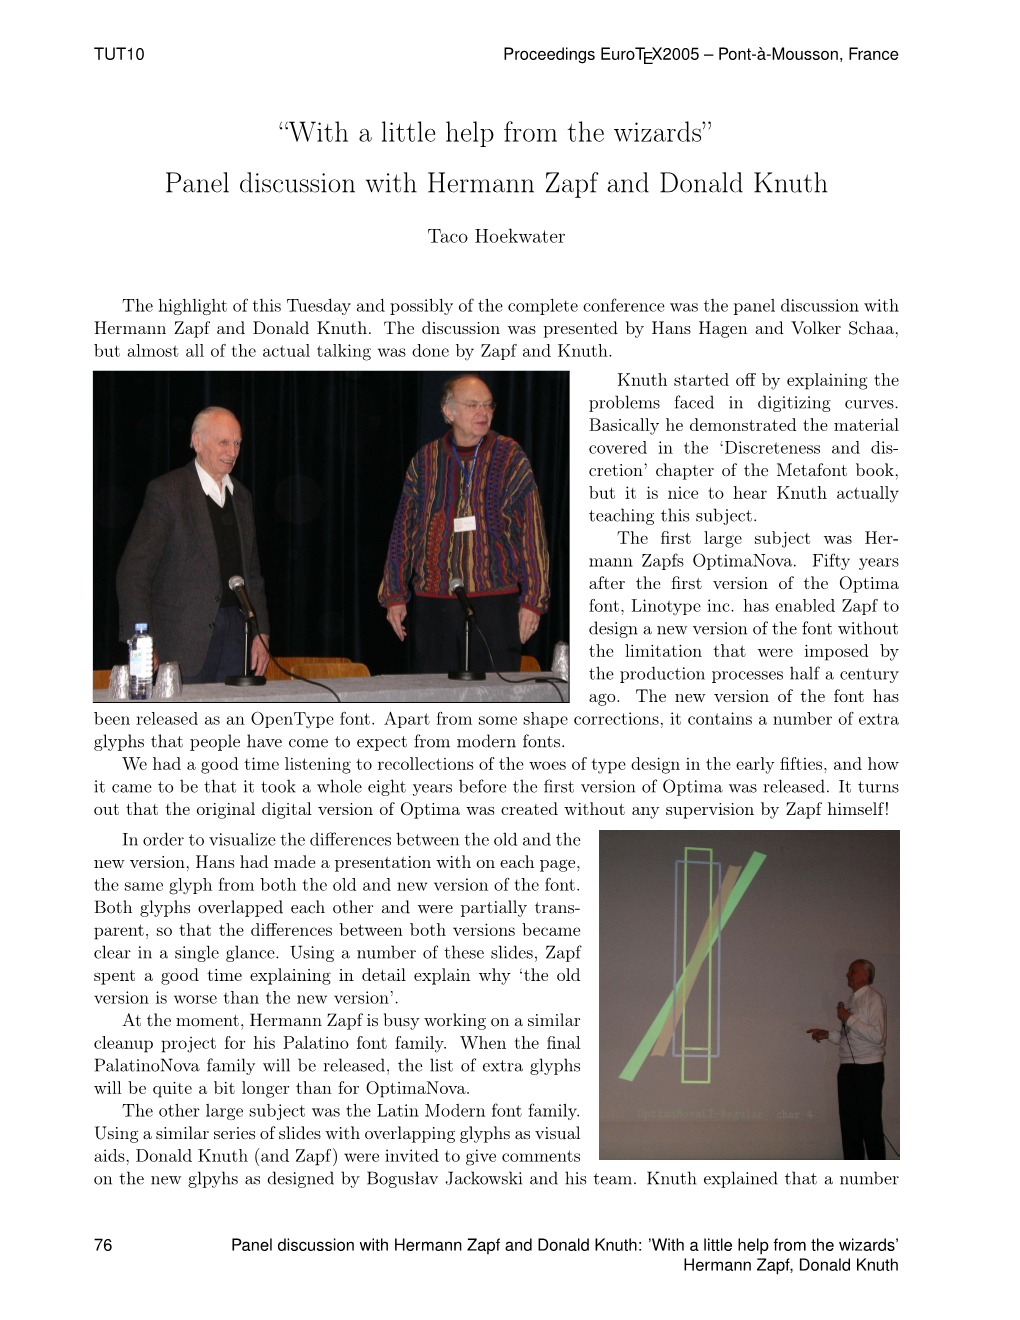 Panel Discussion with Hermann Zapf and Donald Knuth